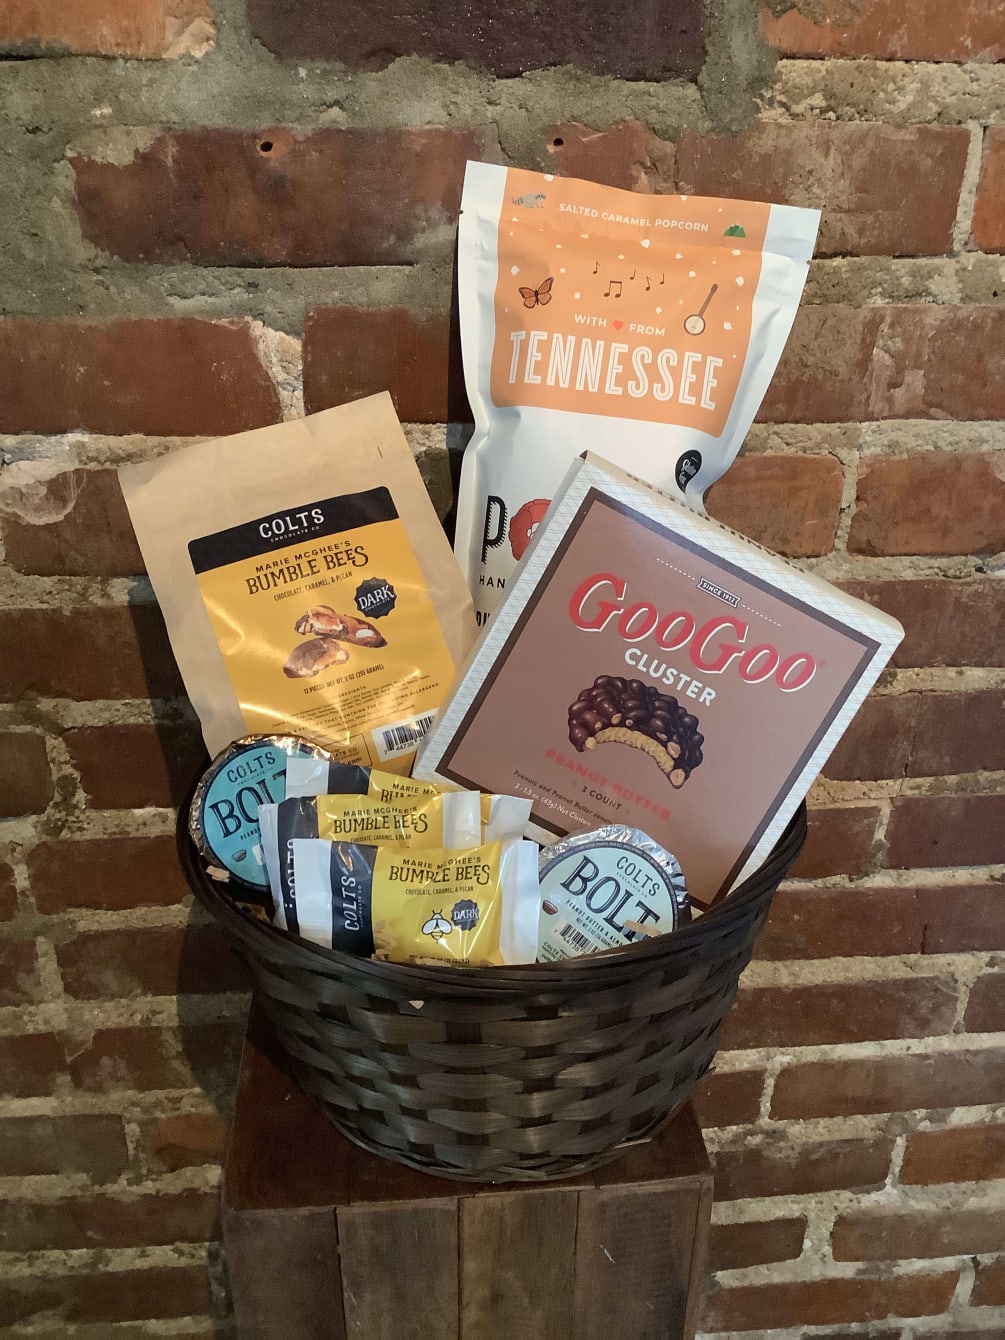 Get a basket full of local Nashville based goodies.

Flavors can vary based